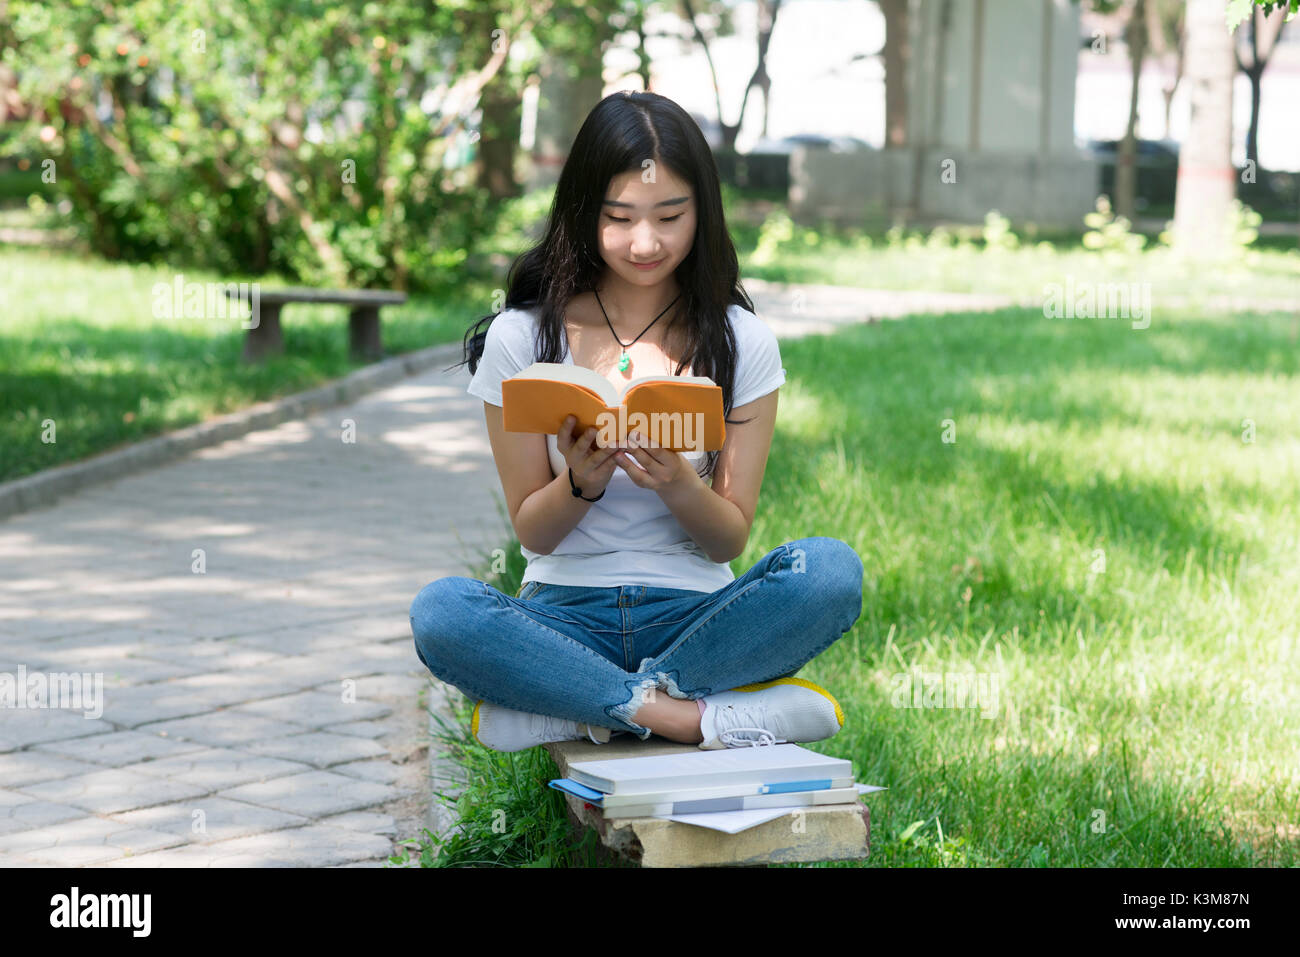 girl student holds a book to read. On the park bench. Stock Photo